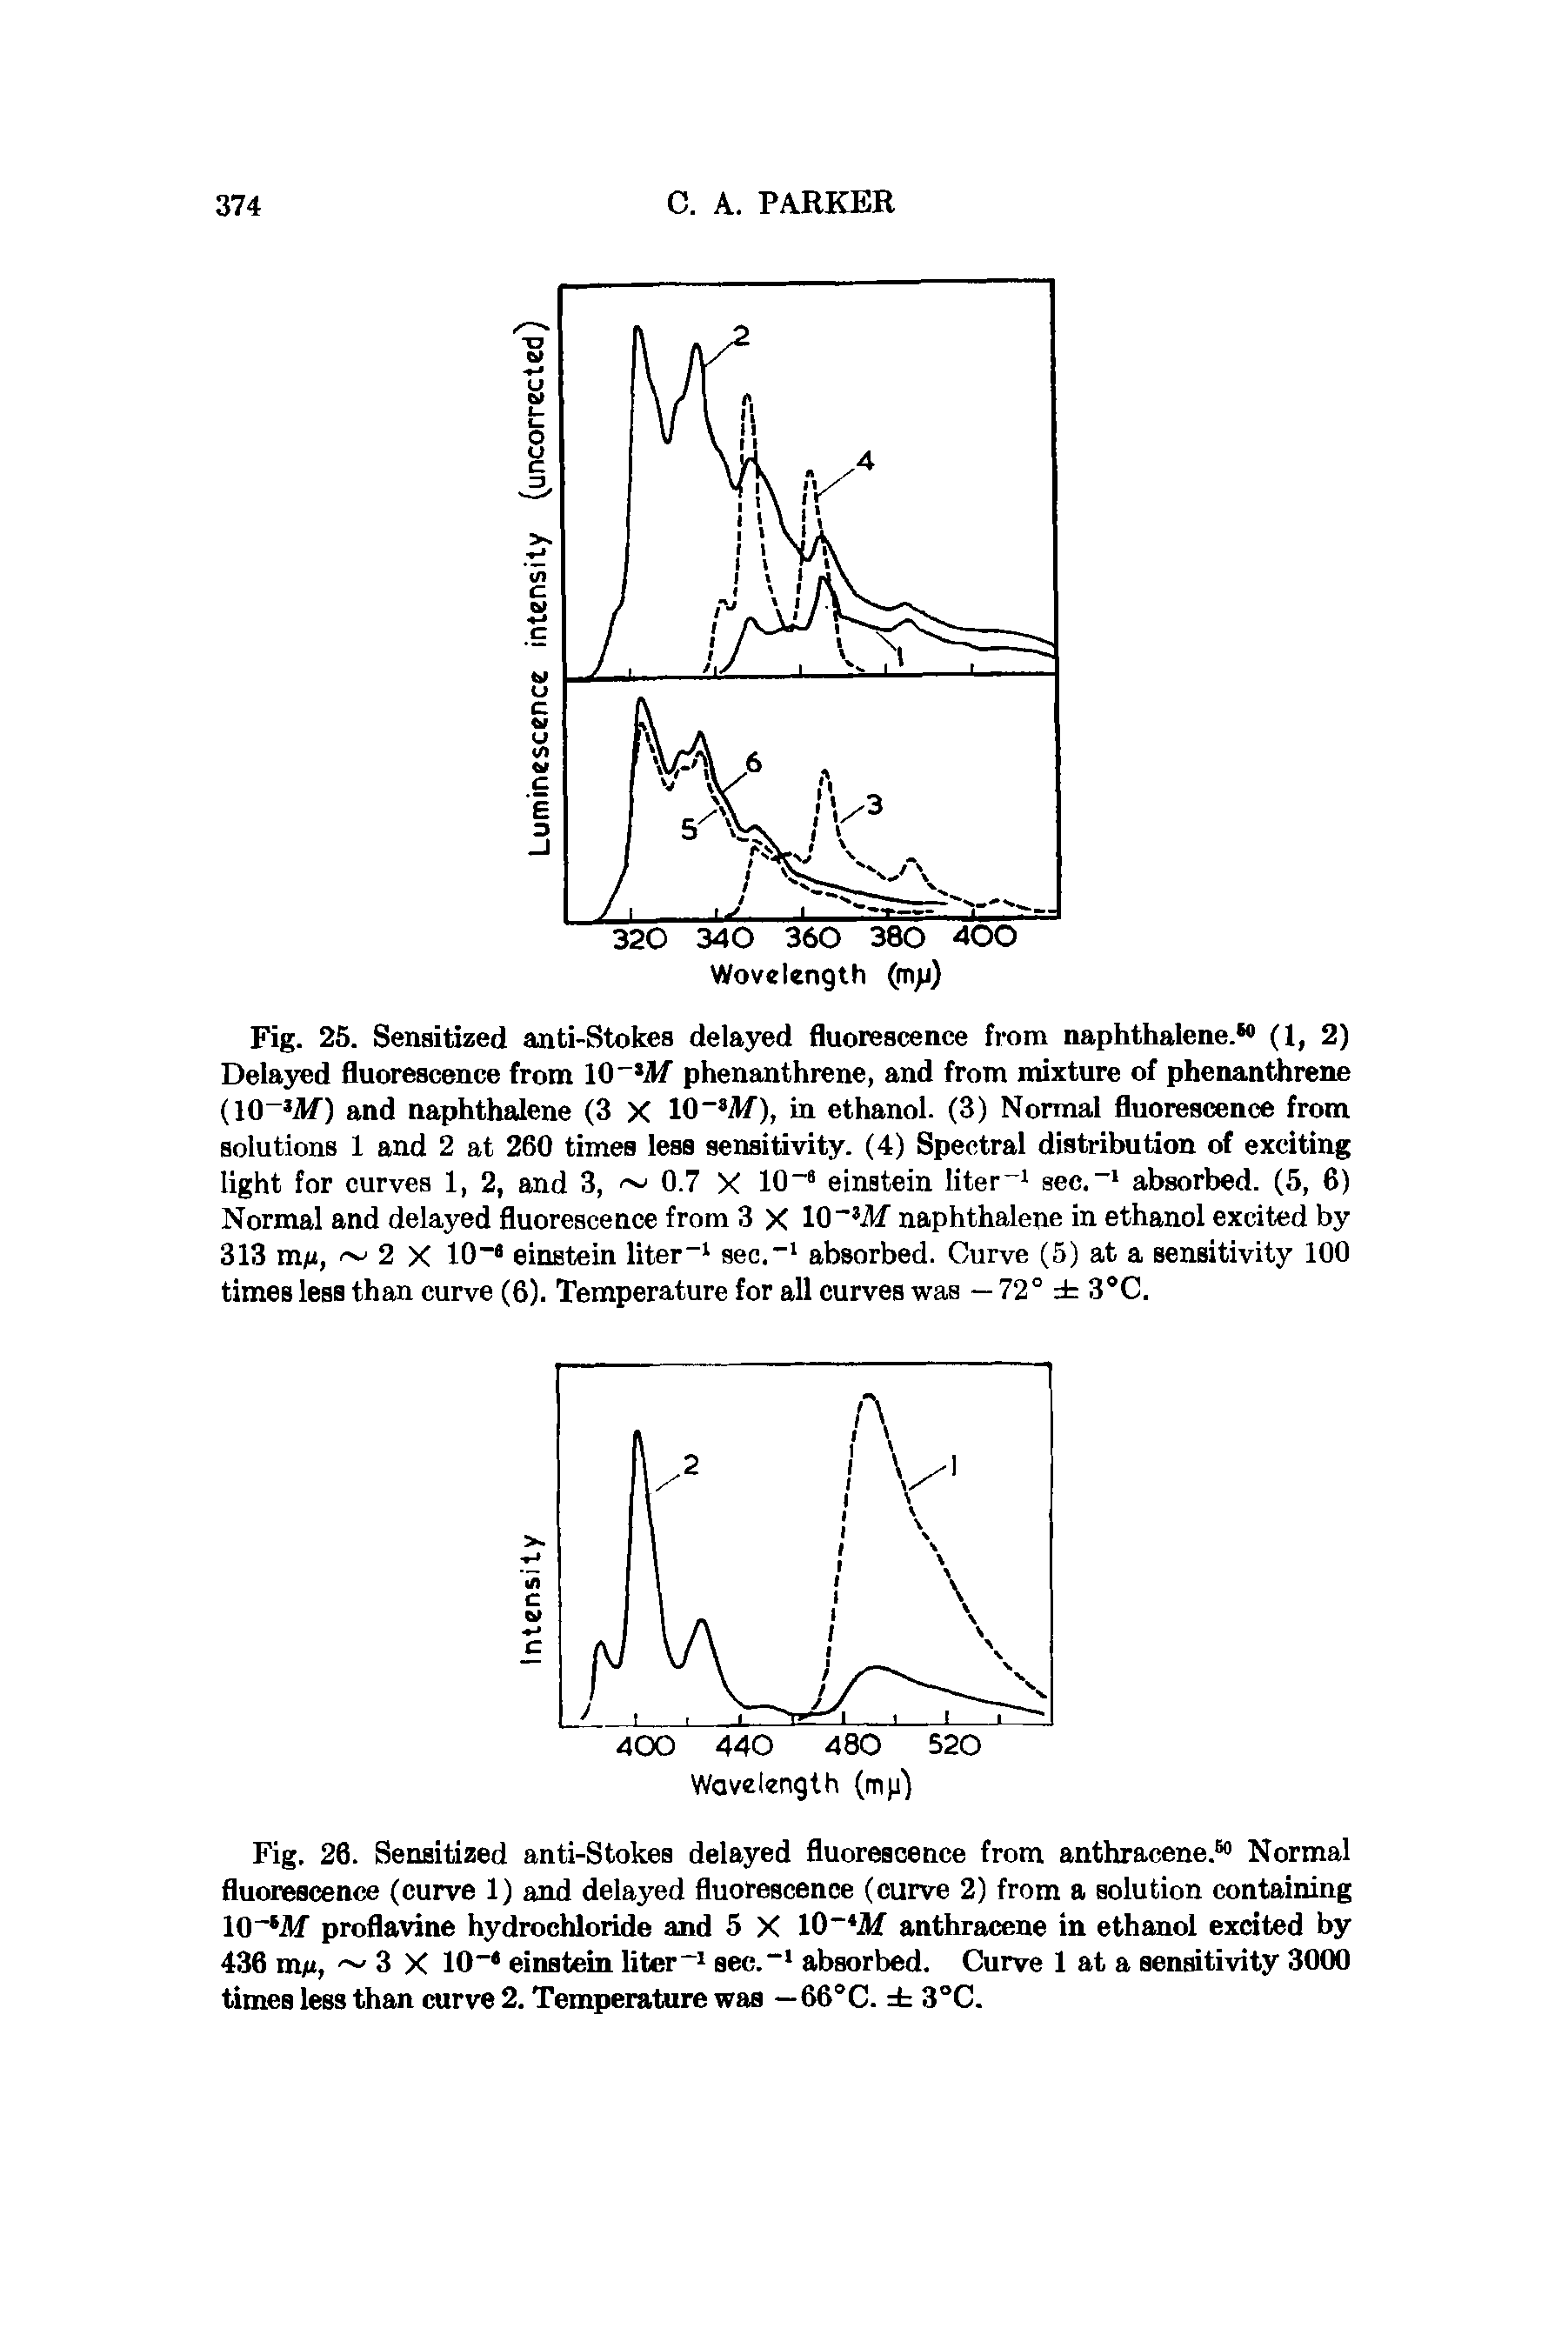 Fig. 26. Sensitized anti-Stokes delayed fluorescence from anthracene.60 Normal fluorescence (curve 1) and delayed fluorescence (curve 2) from a solution containing 10- Af proflavine hydrochloride and 5 X 10-4M anthracene in ethanol excited by 436 m/ , 3 X 10-4 einstein liter-1 sec.-1 absorbed. Curve 1 at a sensitivity 3000 times less than curve 2. Temperature was — 66°C. 3°C.